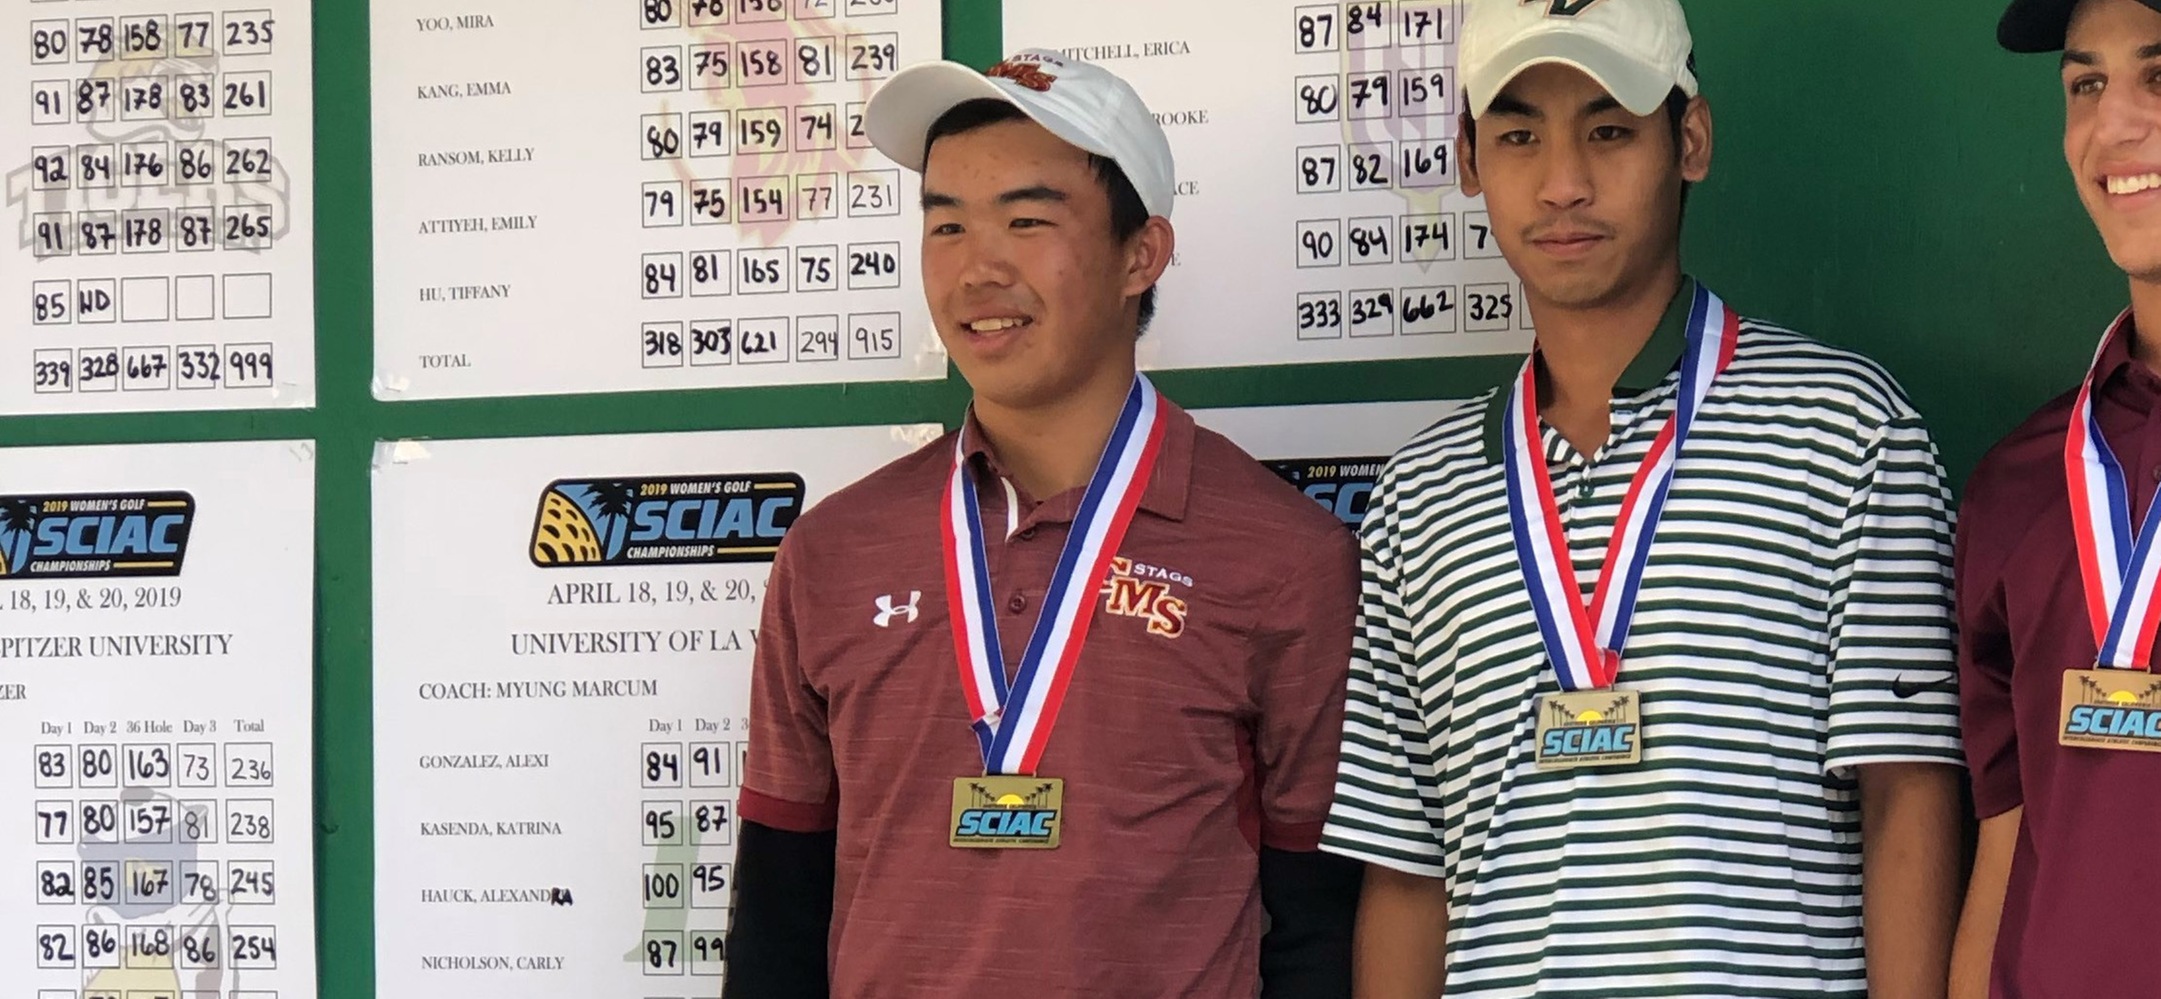 Mason Chiu won the individual SCIAC title by seven strokes with a -5 over the three rounds.